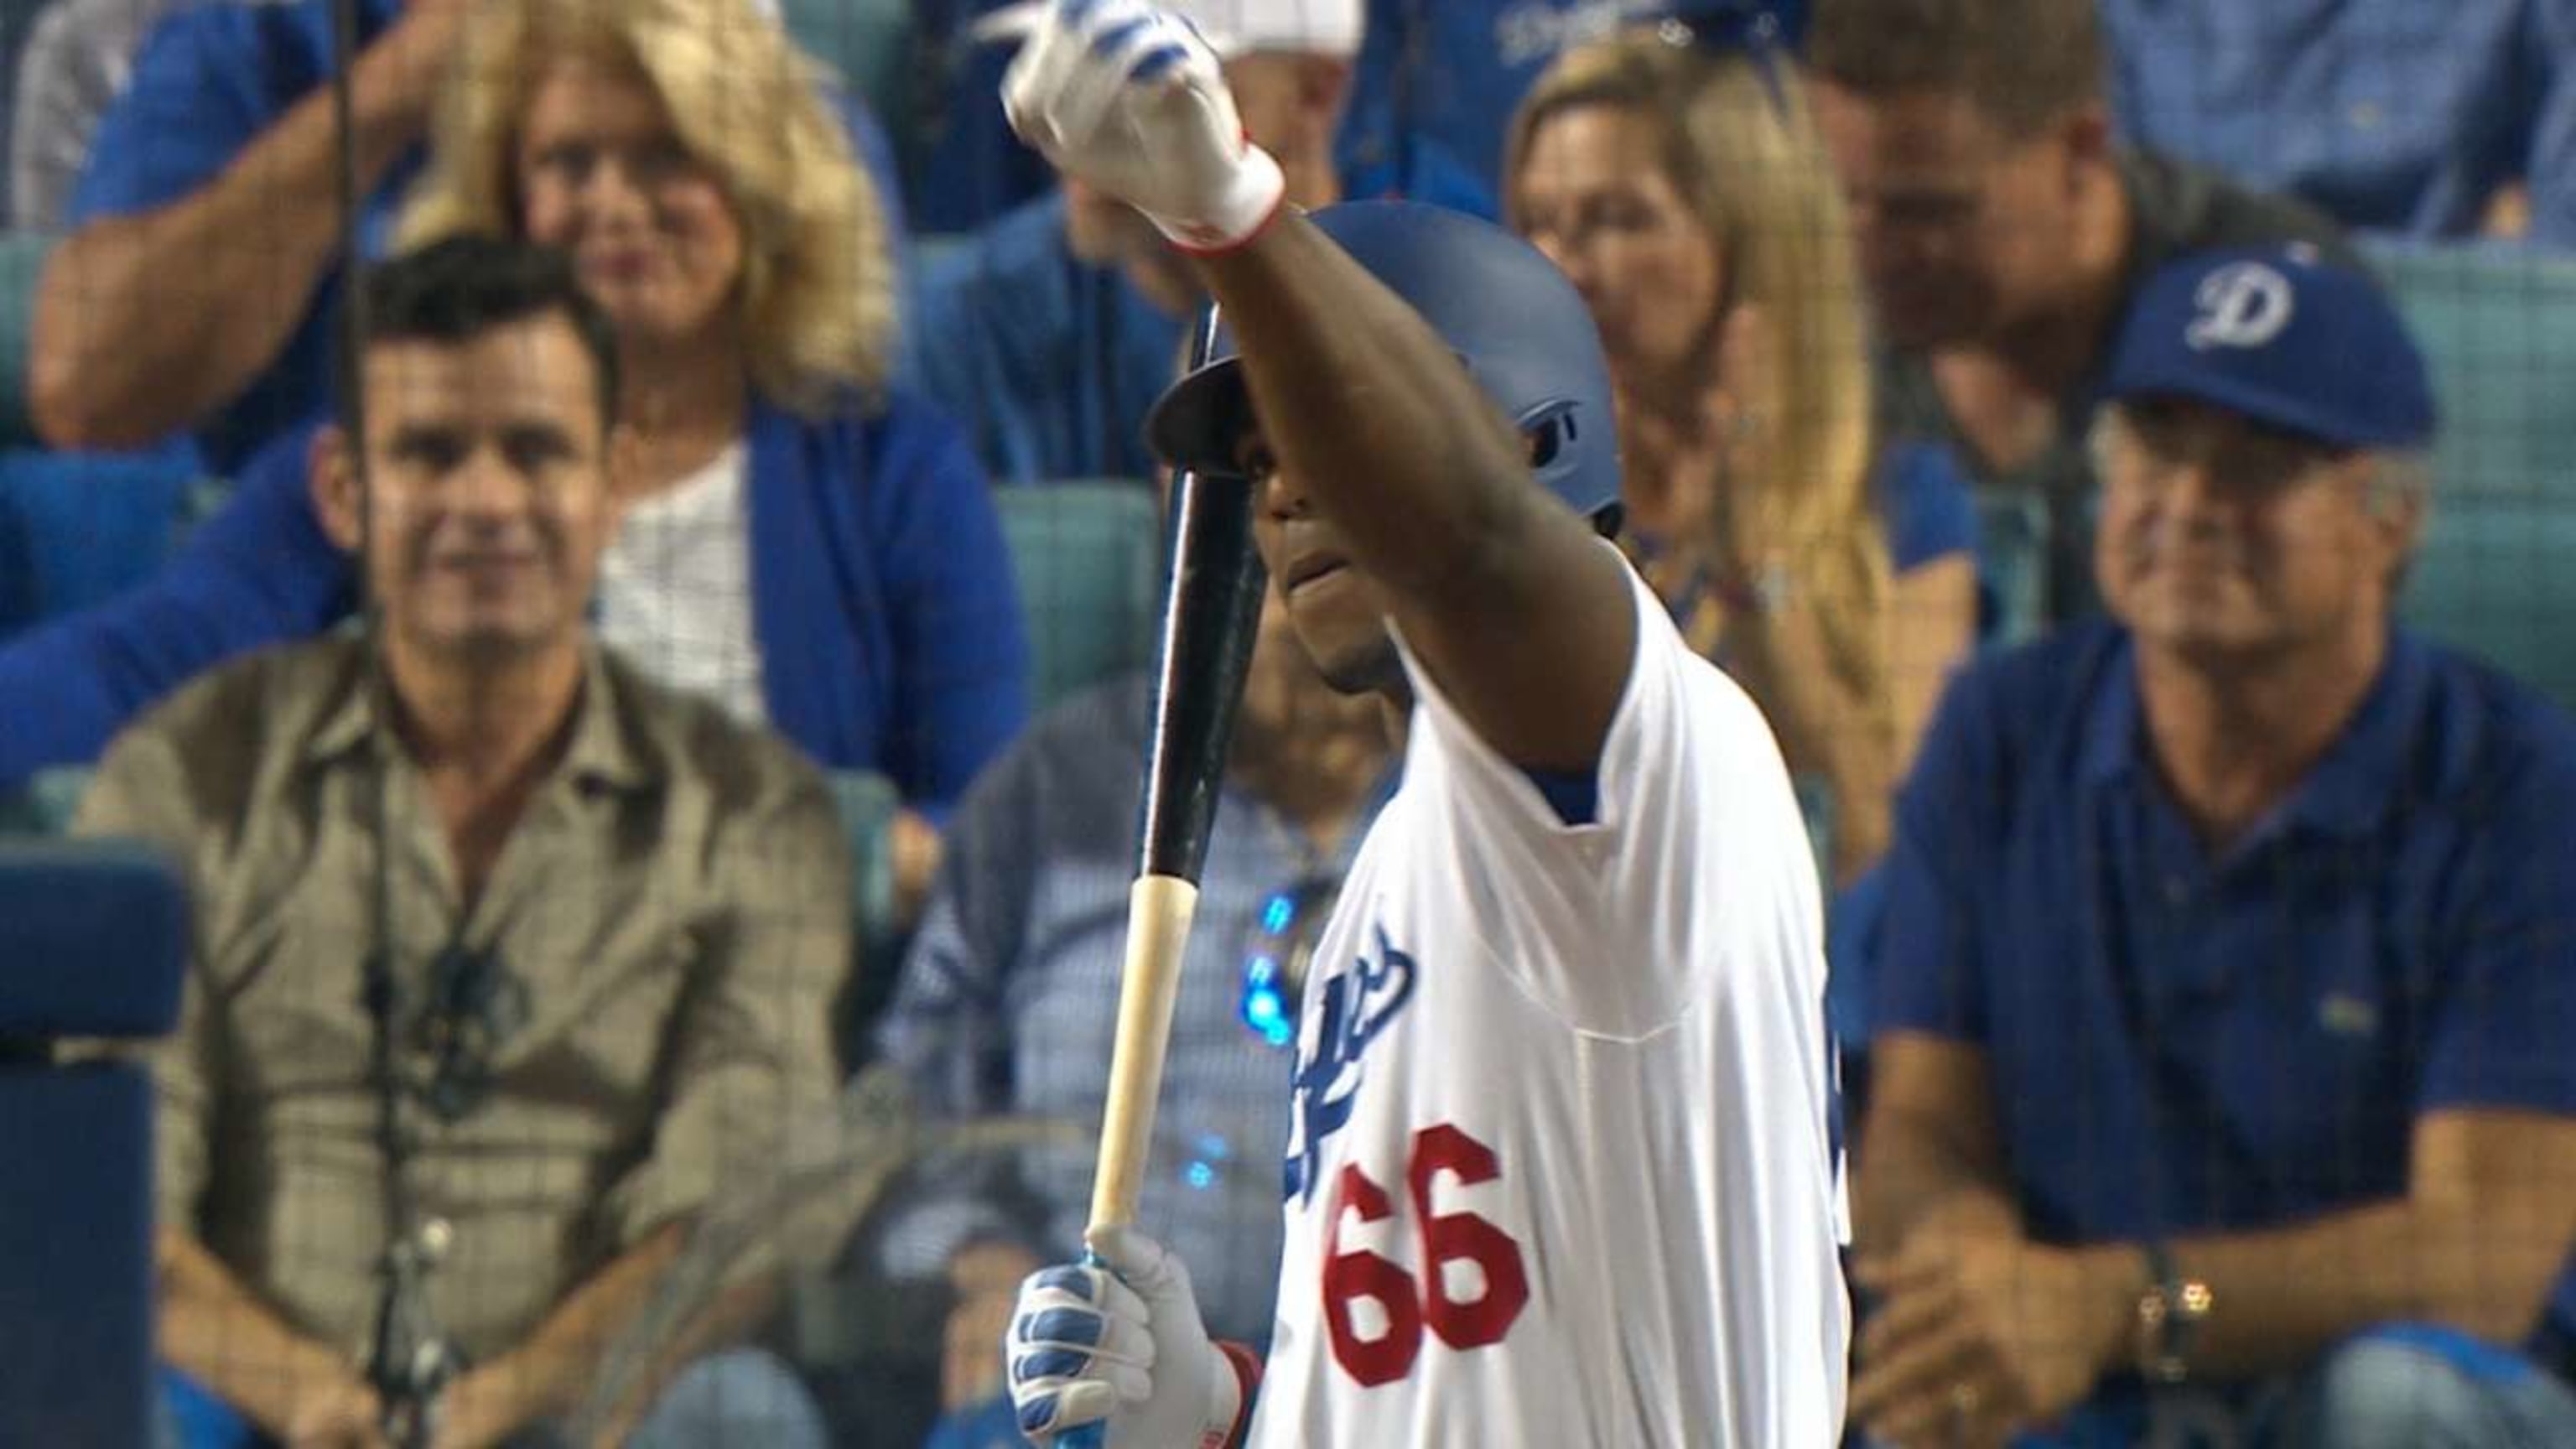 For his next act, Yasiel Puig sparked a rally with a double, an emphatic  bat flip and a celebration